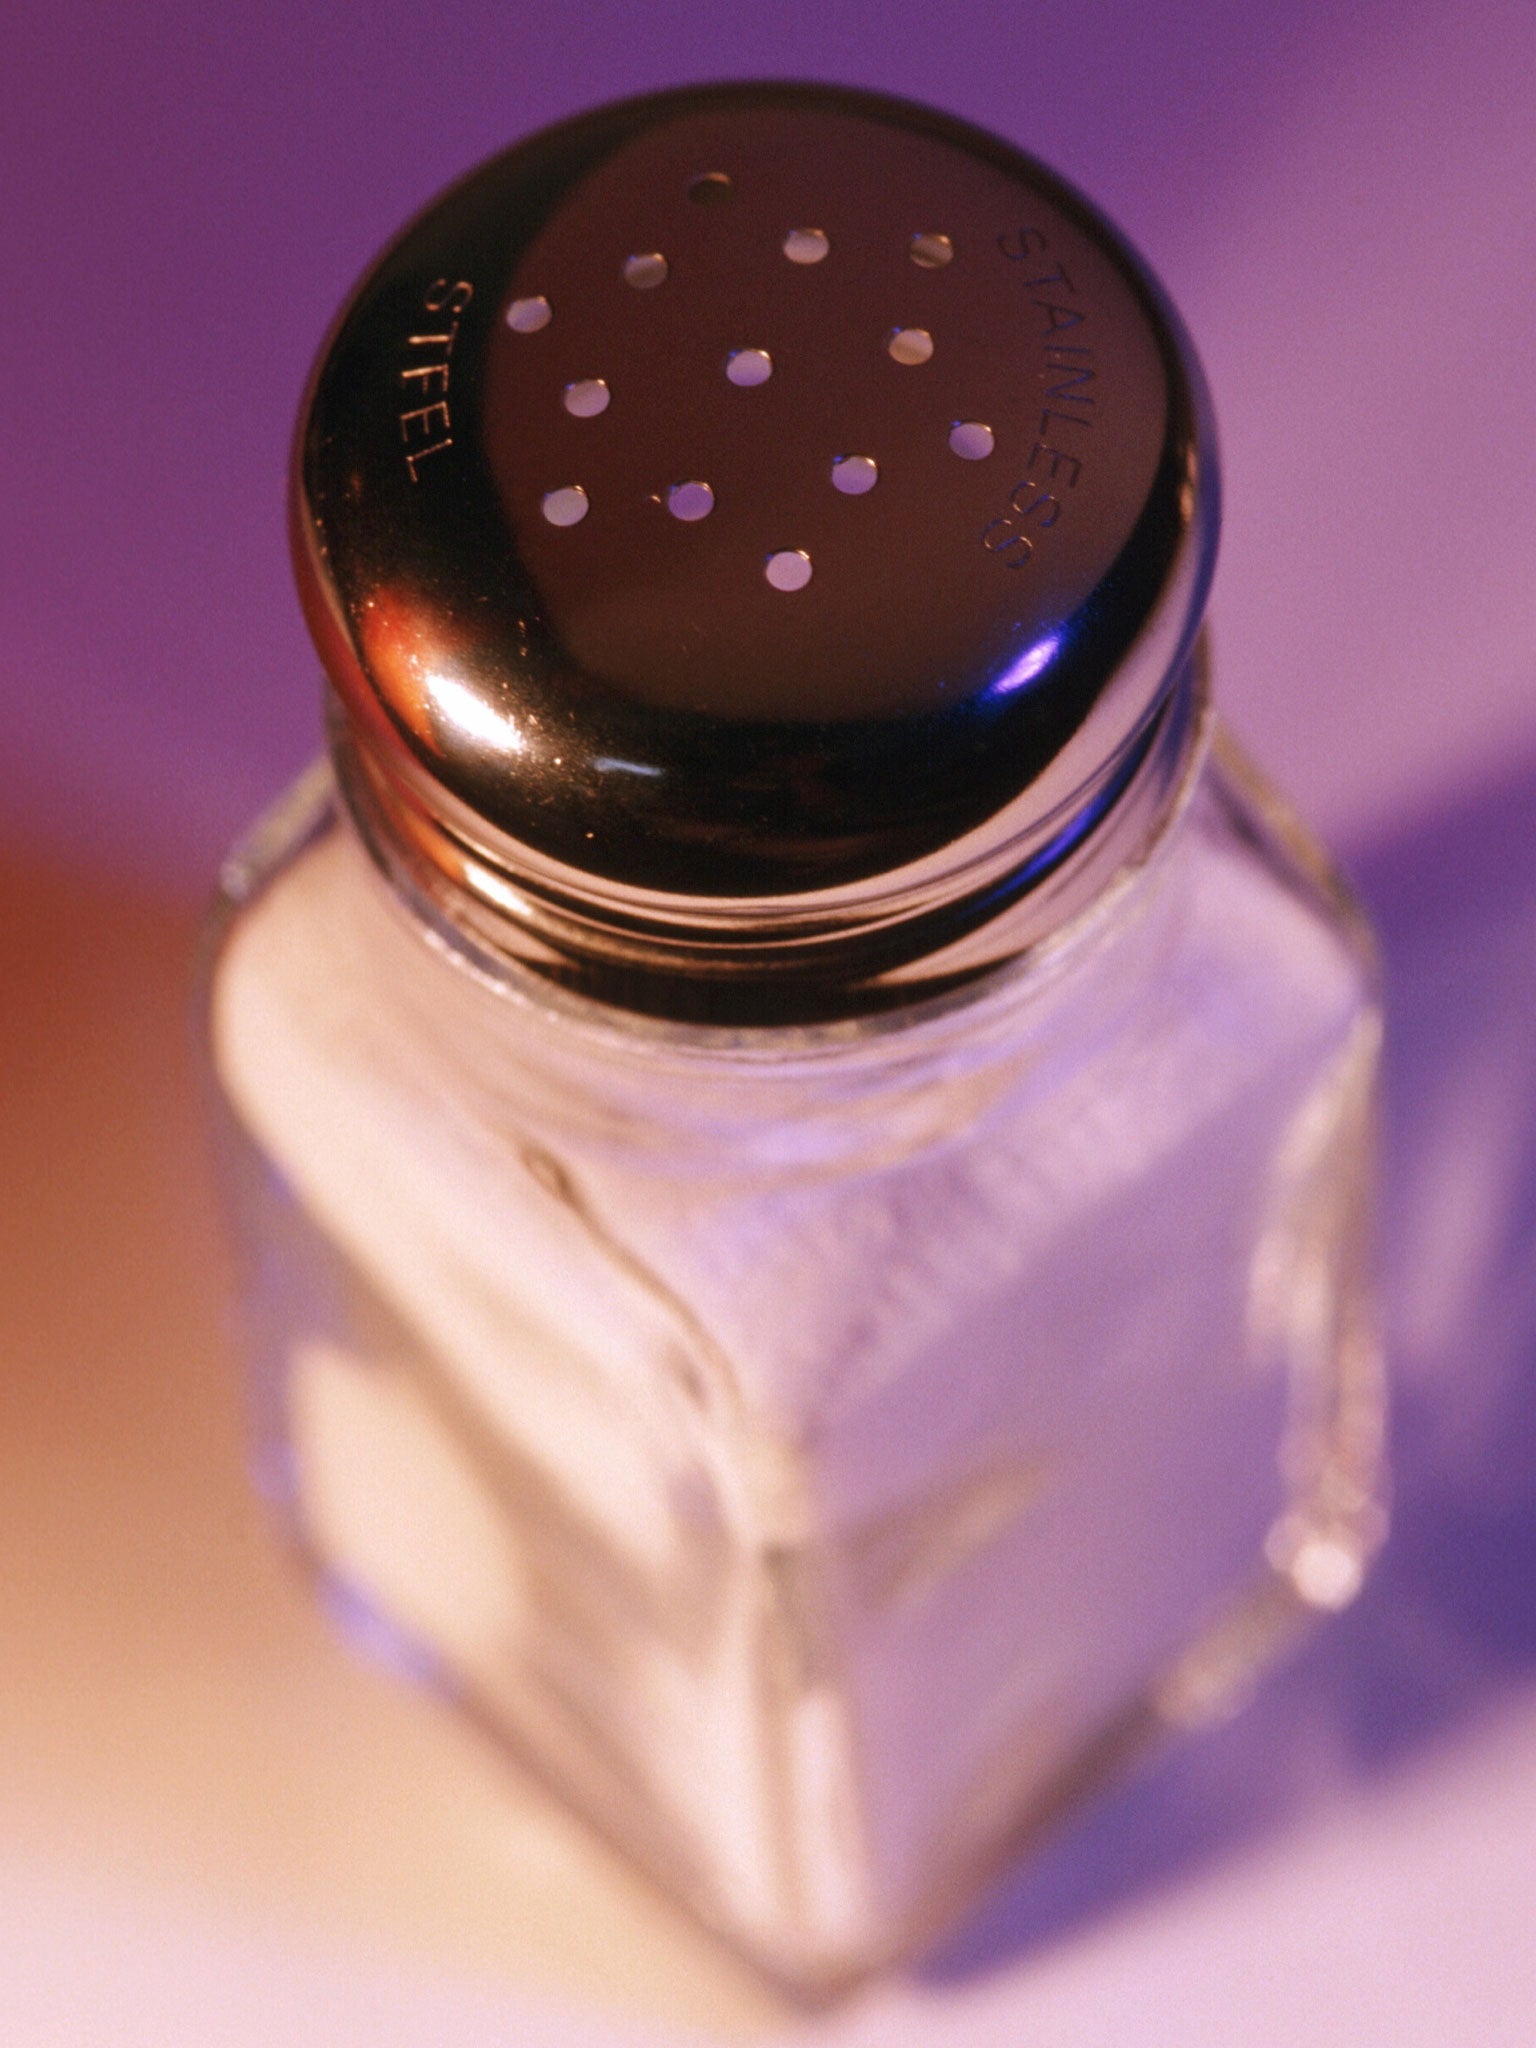 Halving daily salt consumption from 9-12 gms a day, the goal set a decade ago, could prevent 35,000 deaths from heart disease and stroke in the UK and 2.5 million deaths globally